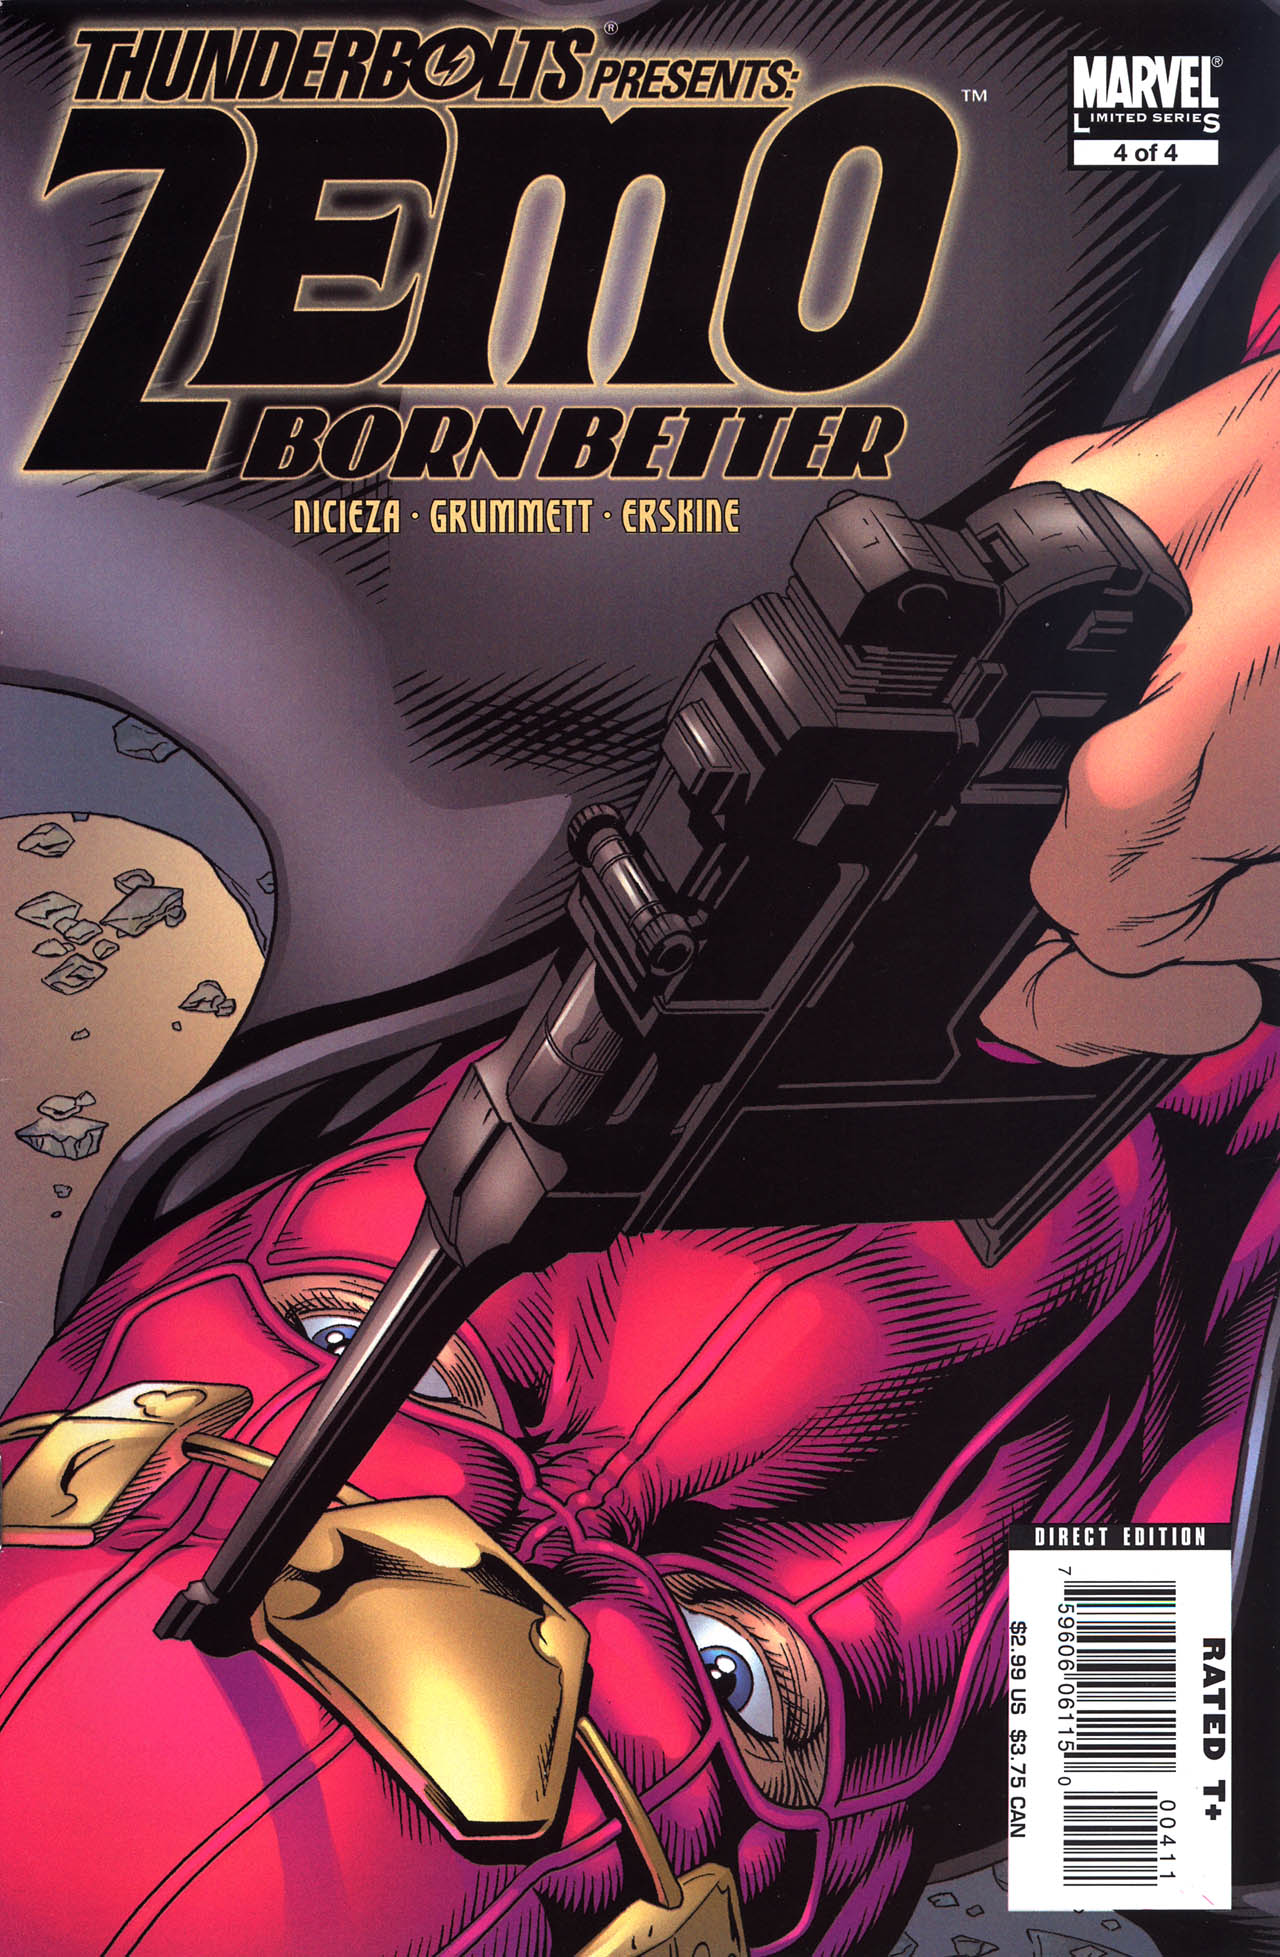 Read online Thunderbolts Presents: Zemo - Born Better comic -  Issue #4 - 1